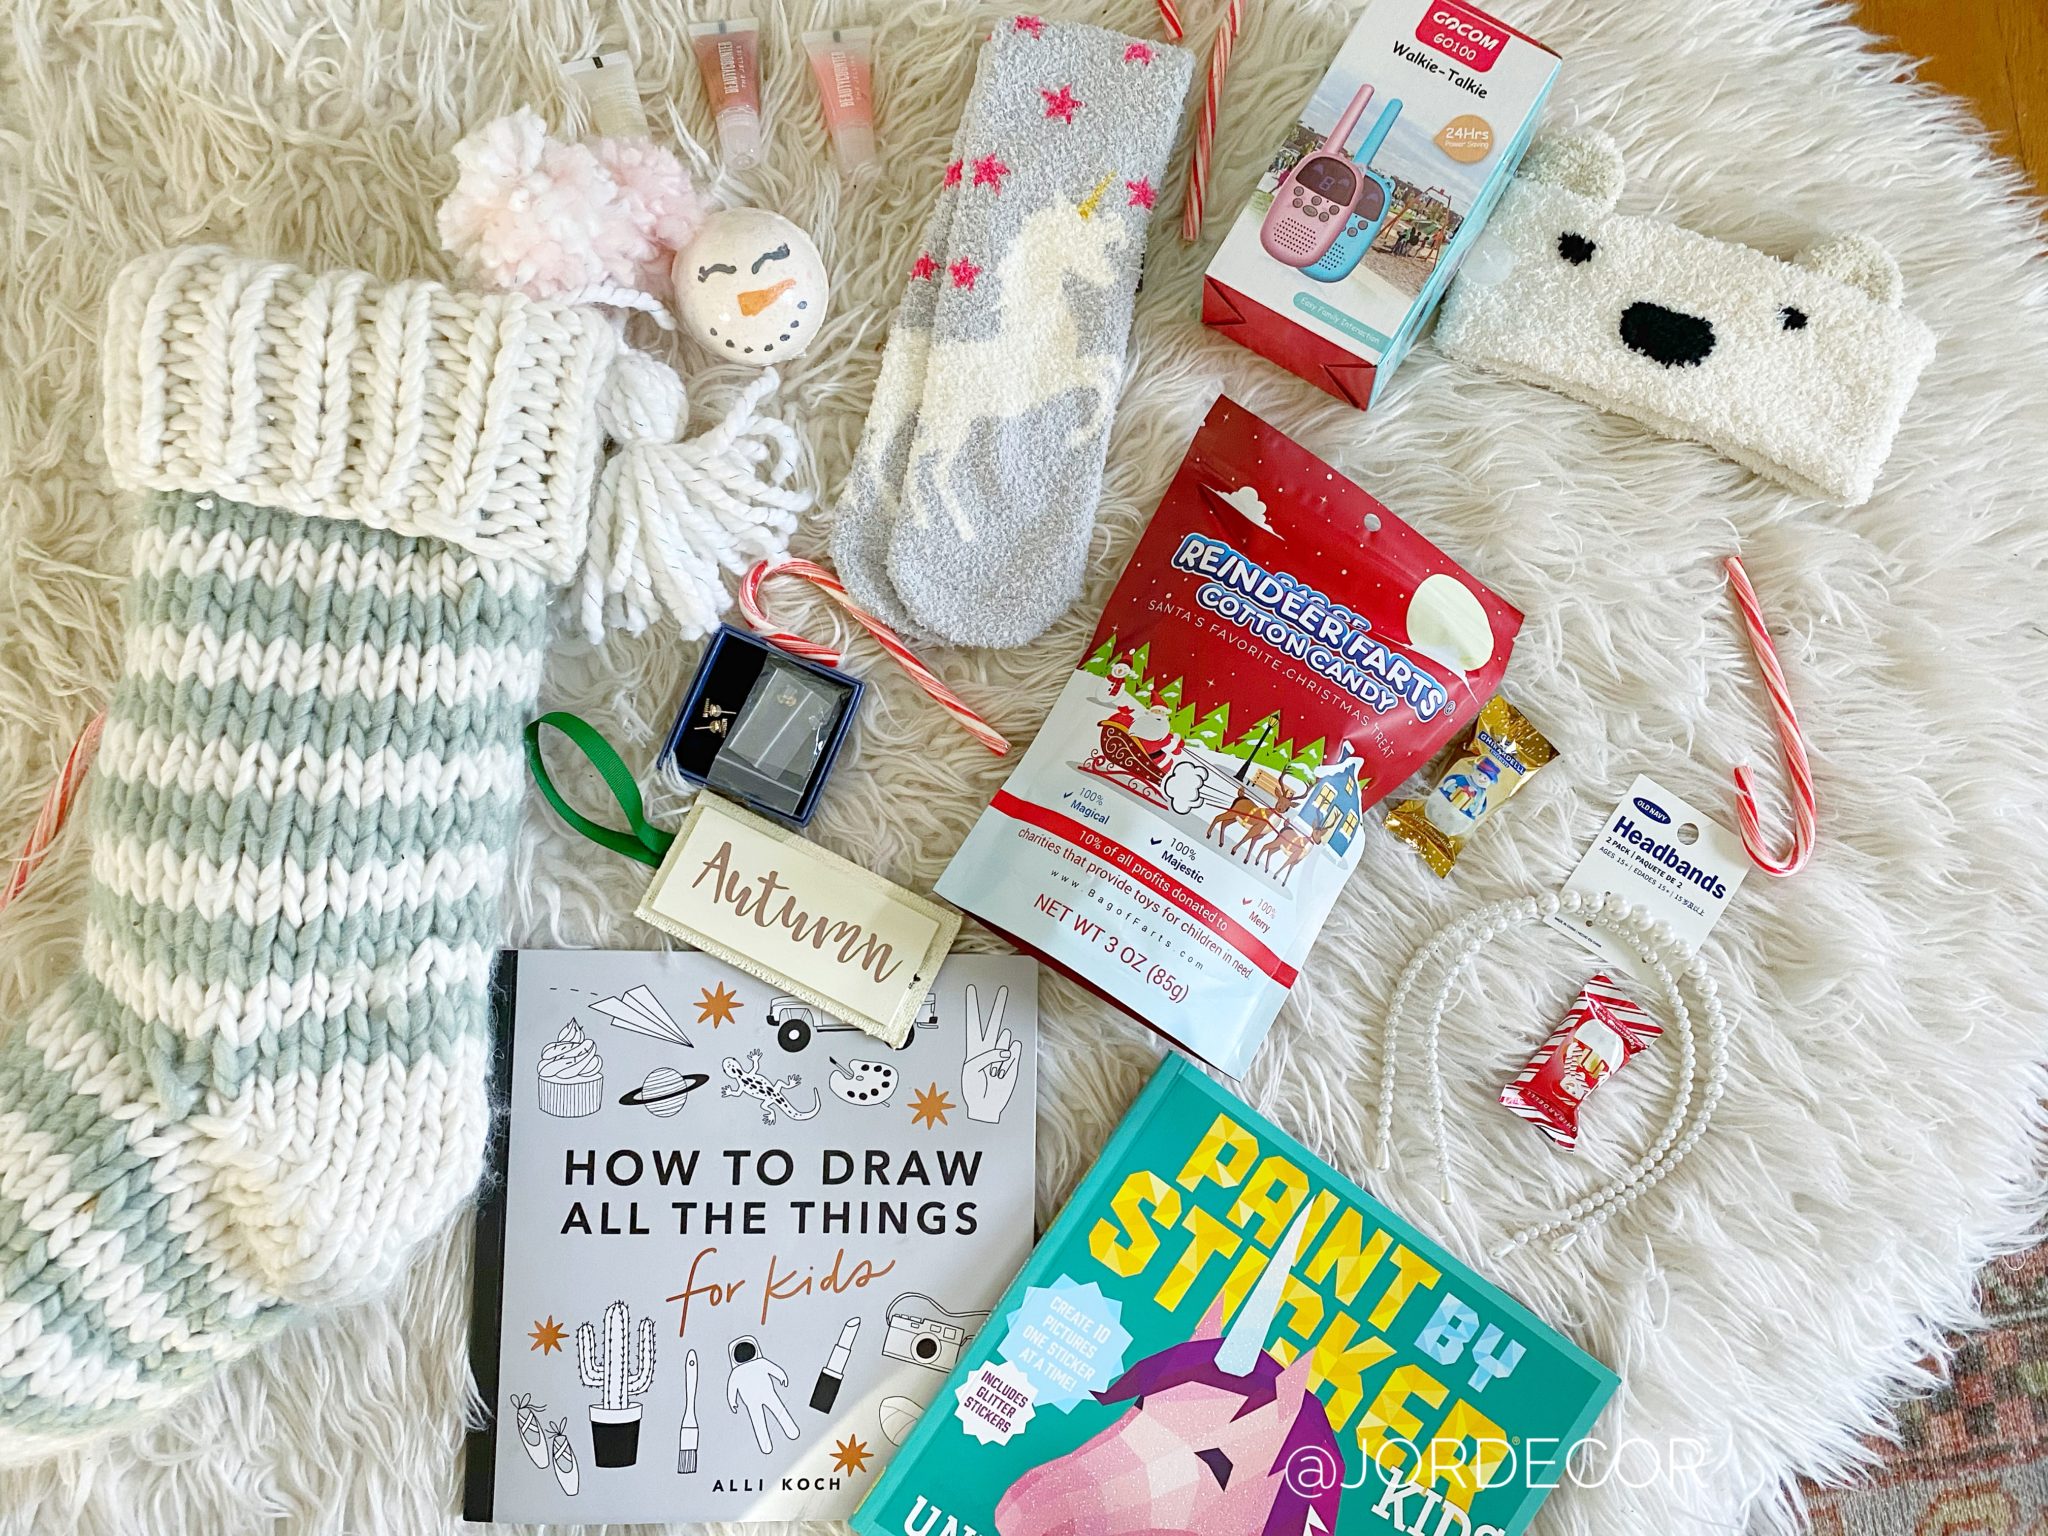 Favorite Stocking Stuffers for Toddlers & Preschoolers - The Littles & Me